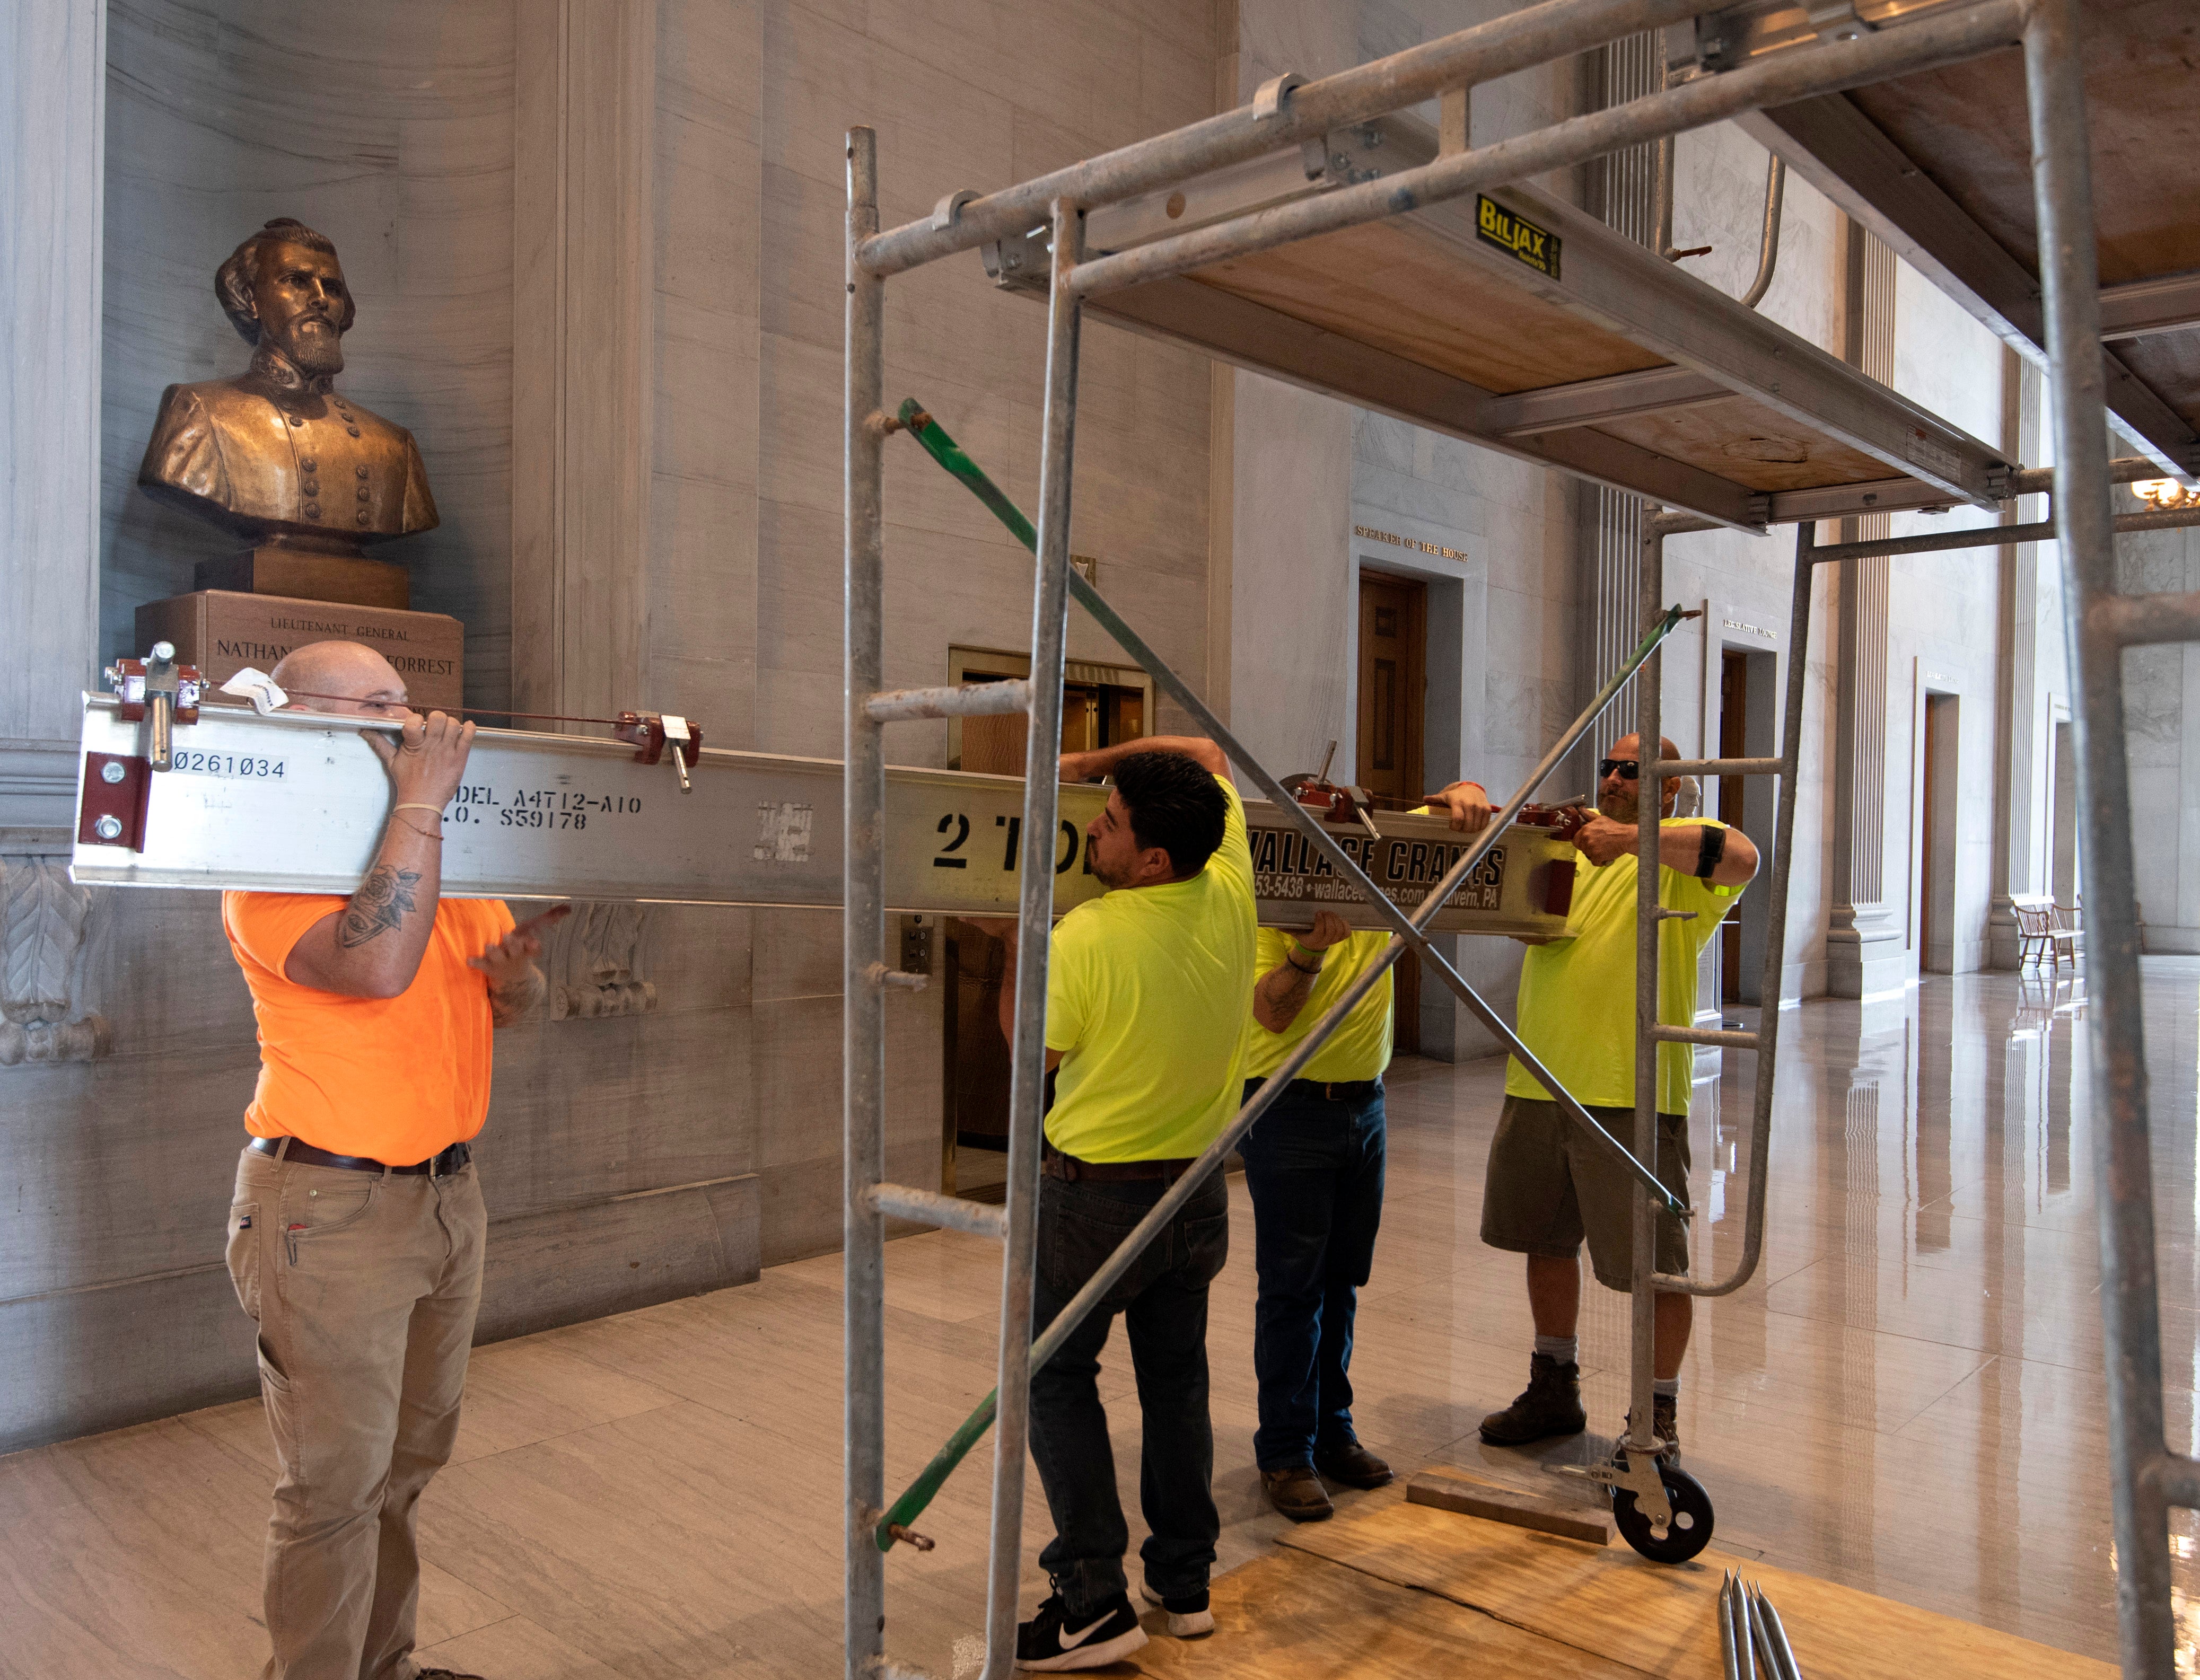 Workers prepare scaffolding in front of a bust of Confederate General and early Ku Klux Klan leader Nathan Bedford Forrest at the State Capitol Thursday, 22 July 2021 in Nashville, Tennessee.